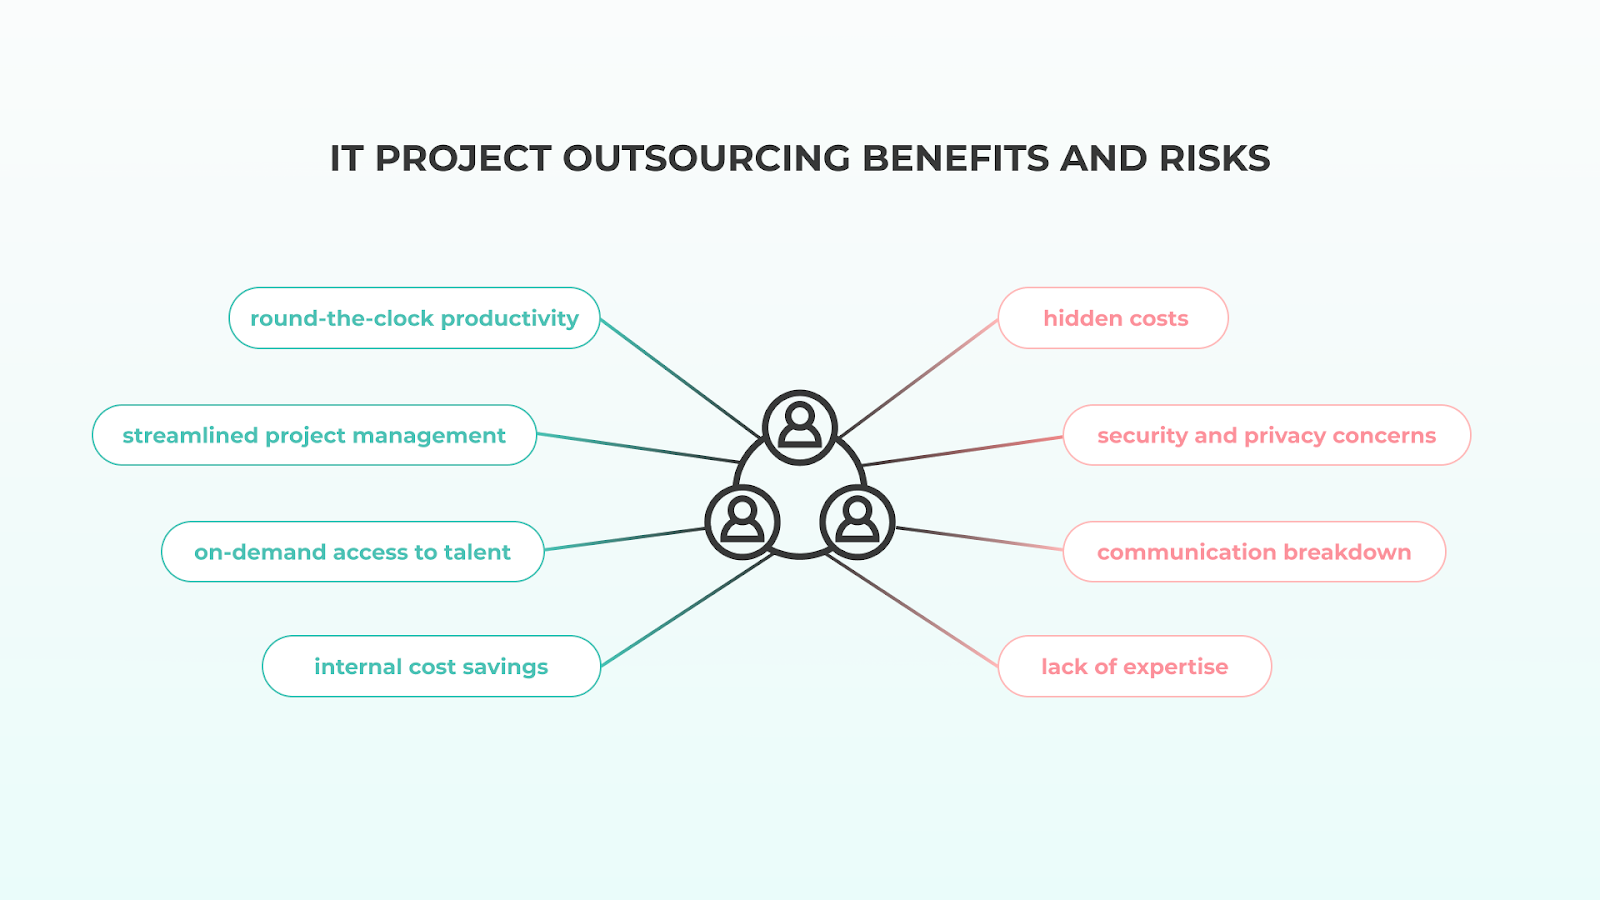 IT PROJECT OUTSOURCING BENEFITS AND RISKS